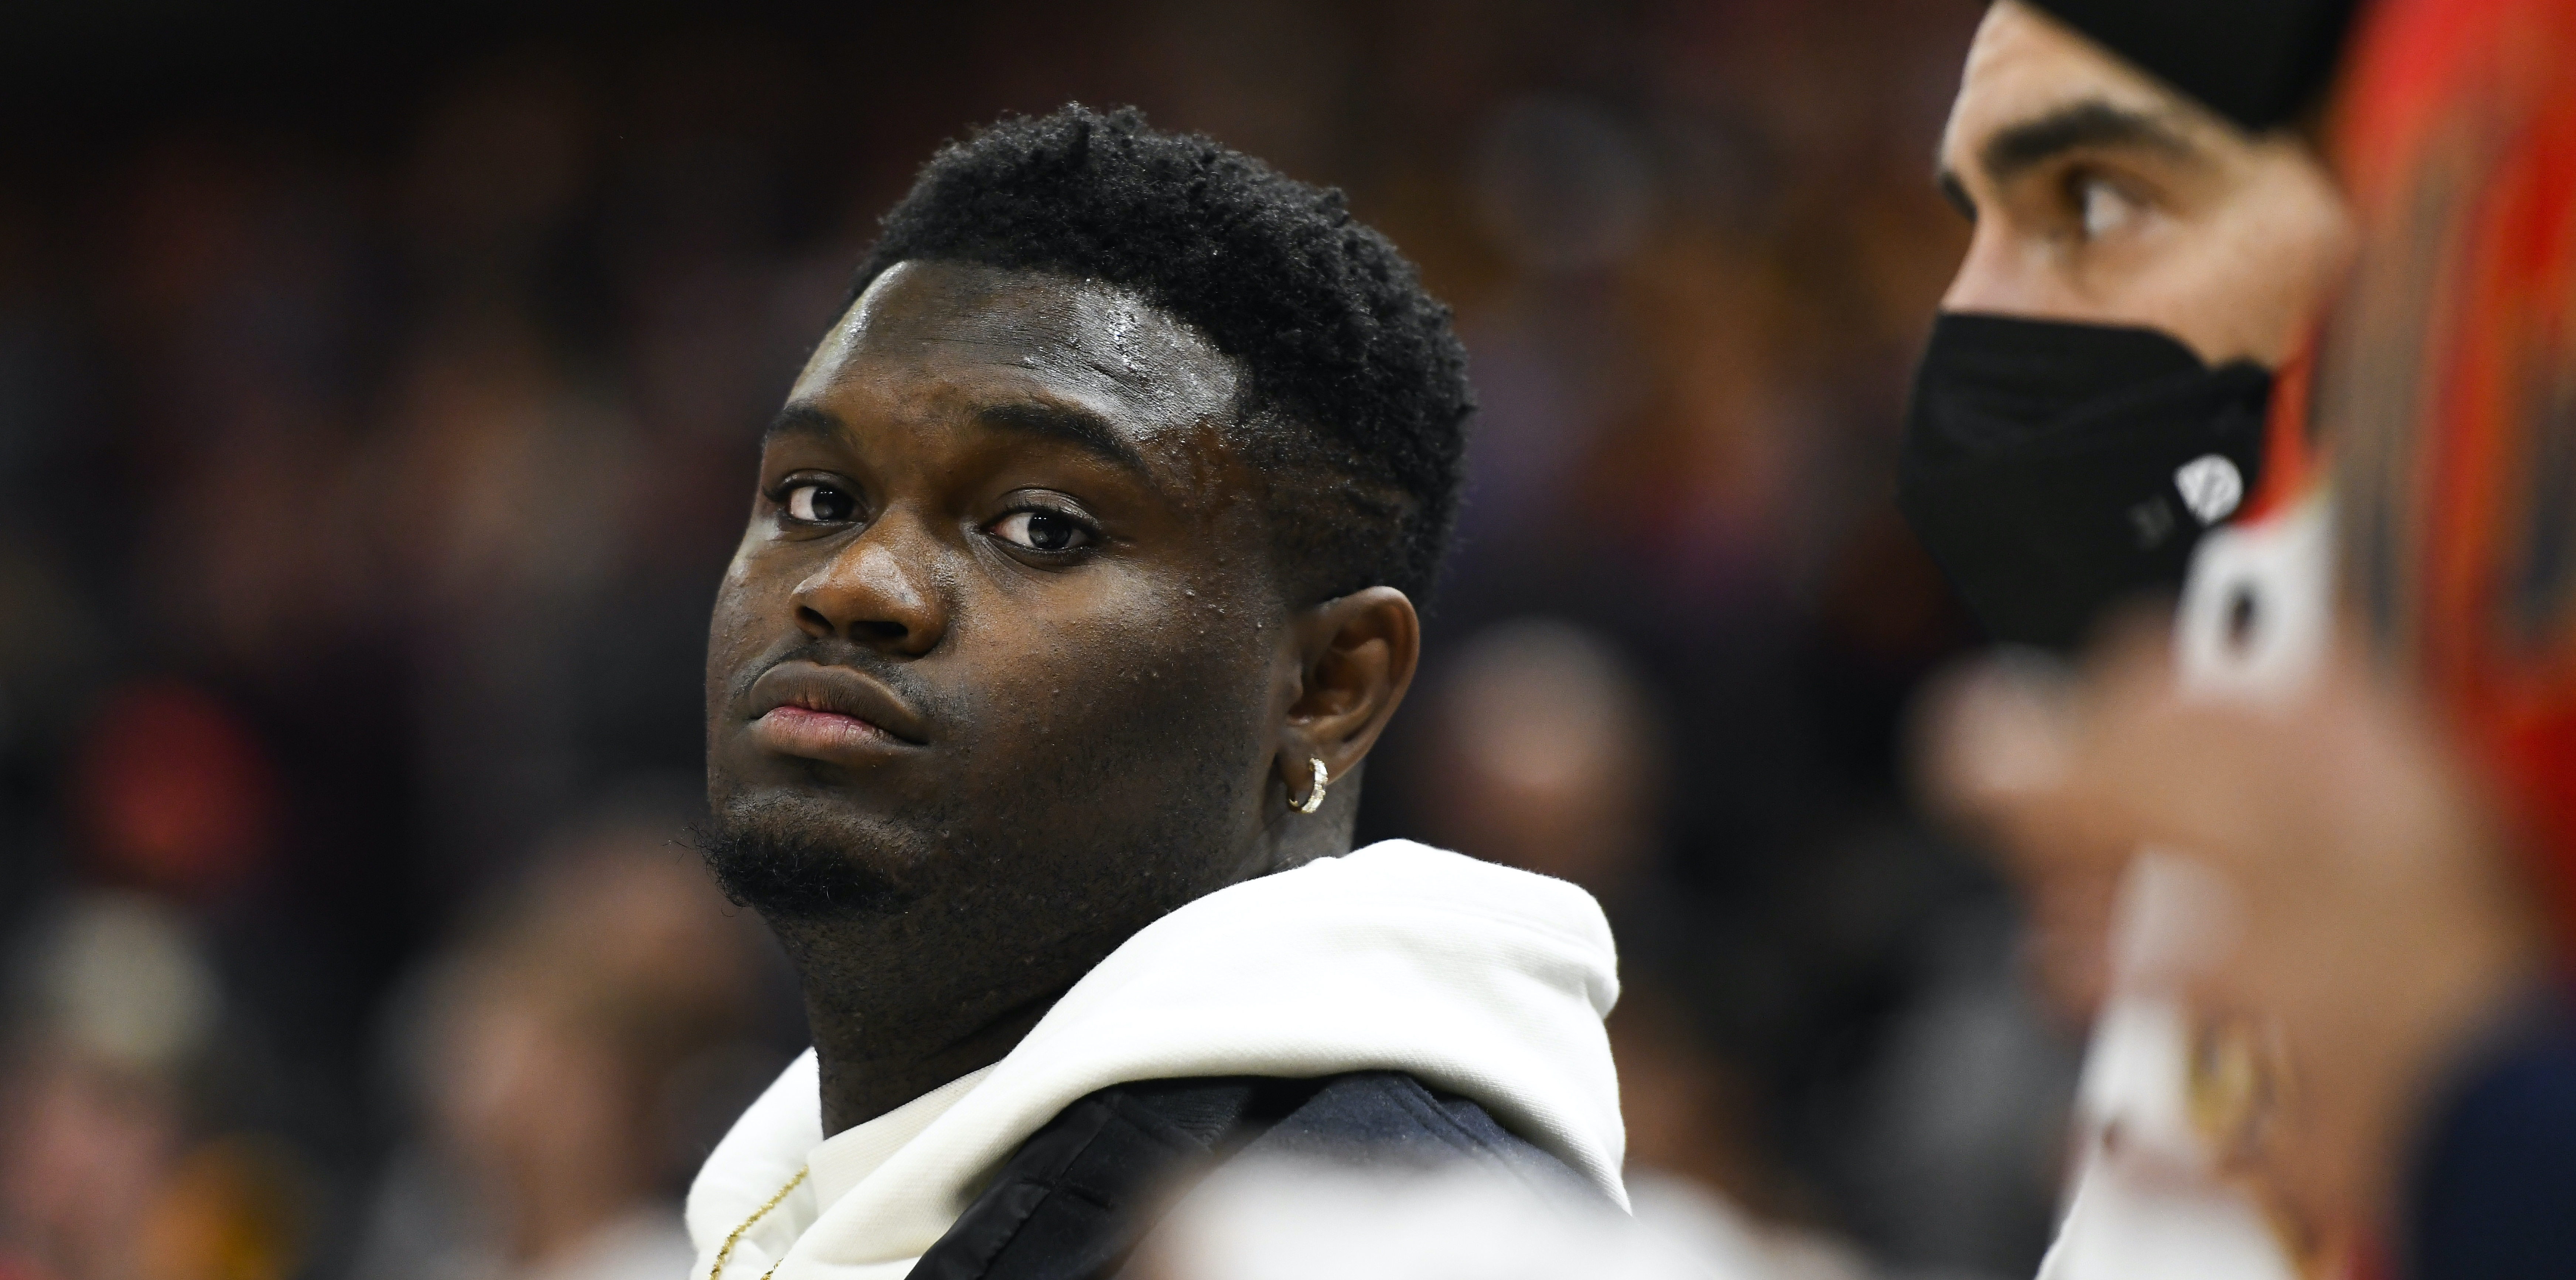 Zion Williamson wasn’t mentioned on a Pelicans season ticket email and now everyone has questions about his future